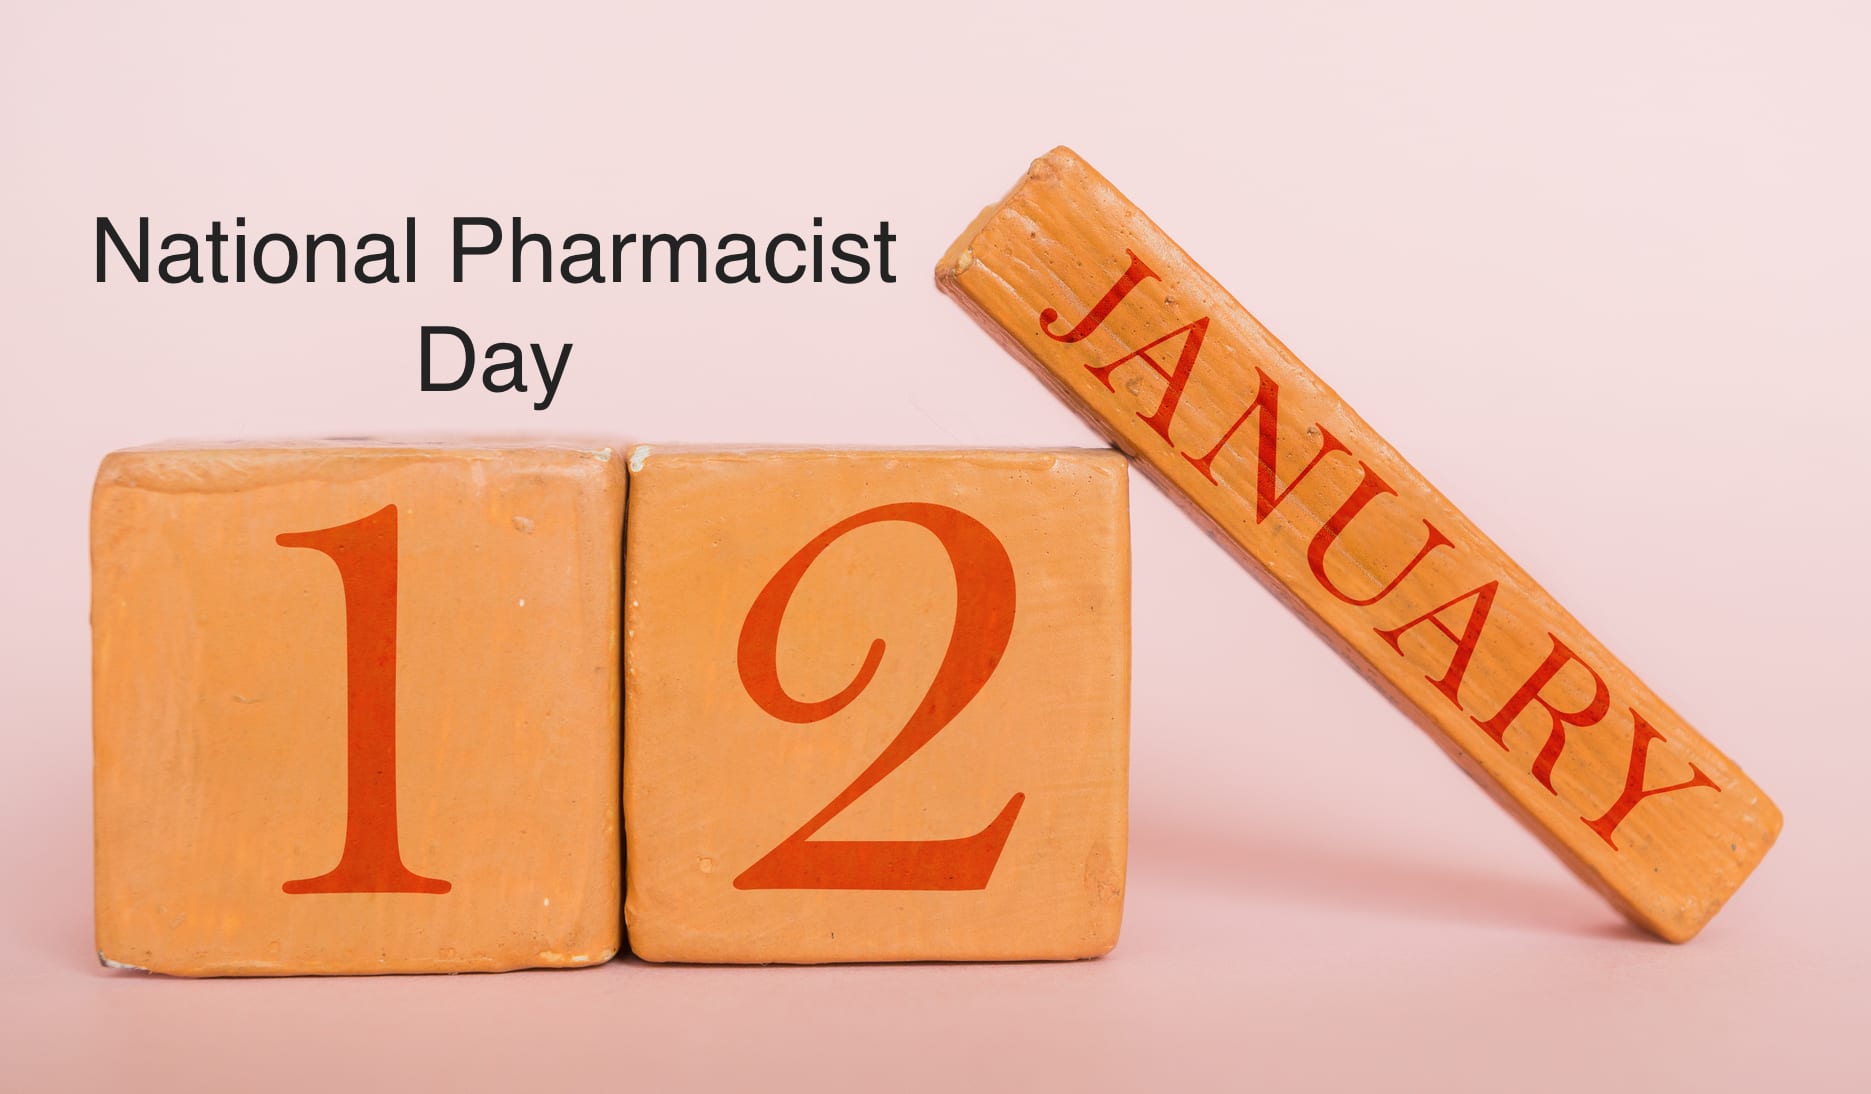 National Pharmacist Day Photo Contest